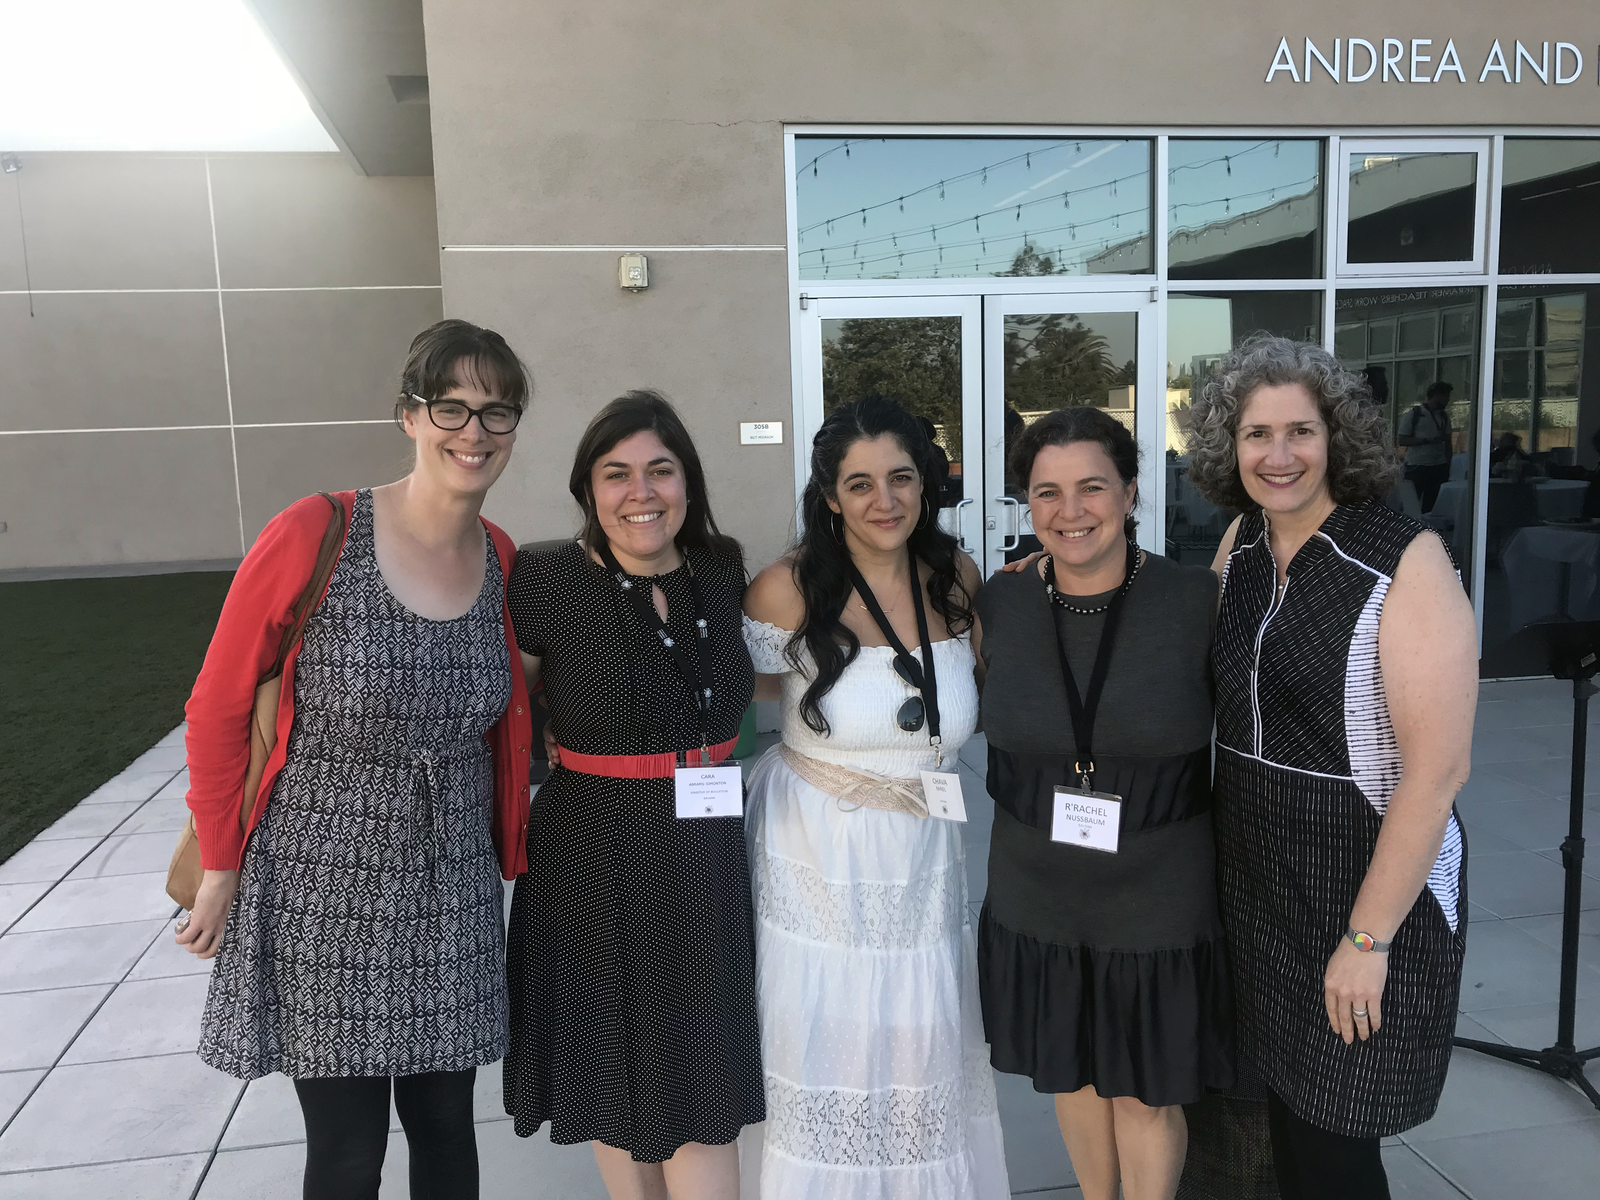 In June 2018, Rabbi Nussbaum and other Kavana staff and board members attended the (Re)Vision conference, hosted by the Jewish Emergent Network in L.A.